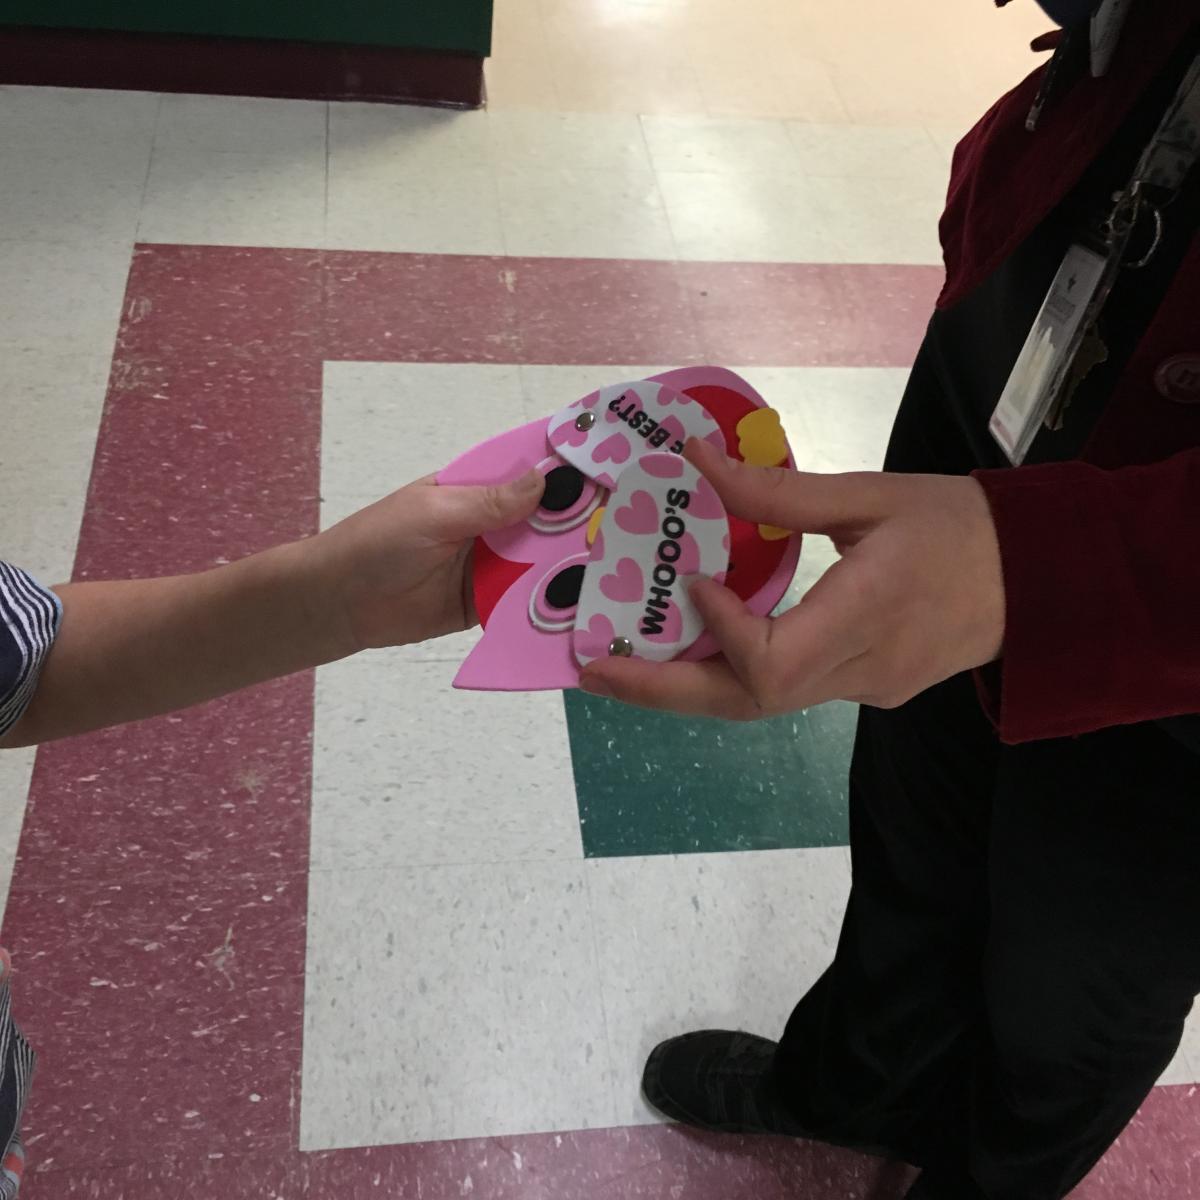 A student hands a valentine to an adult.